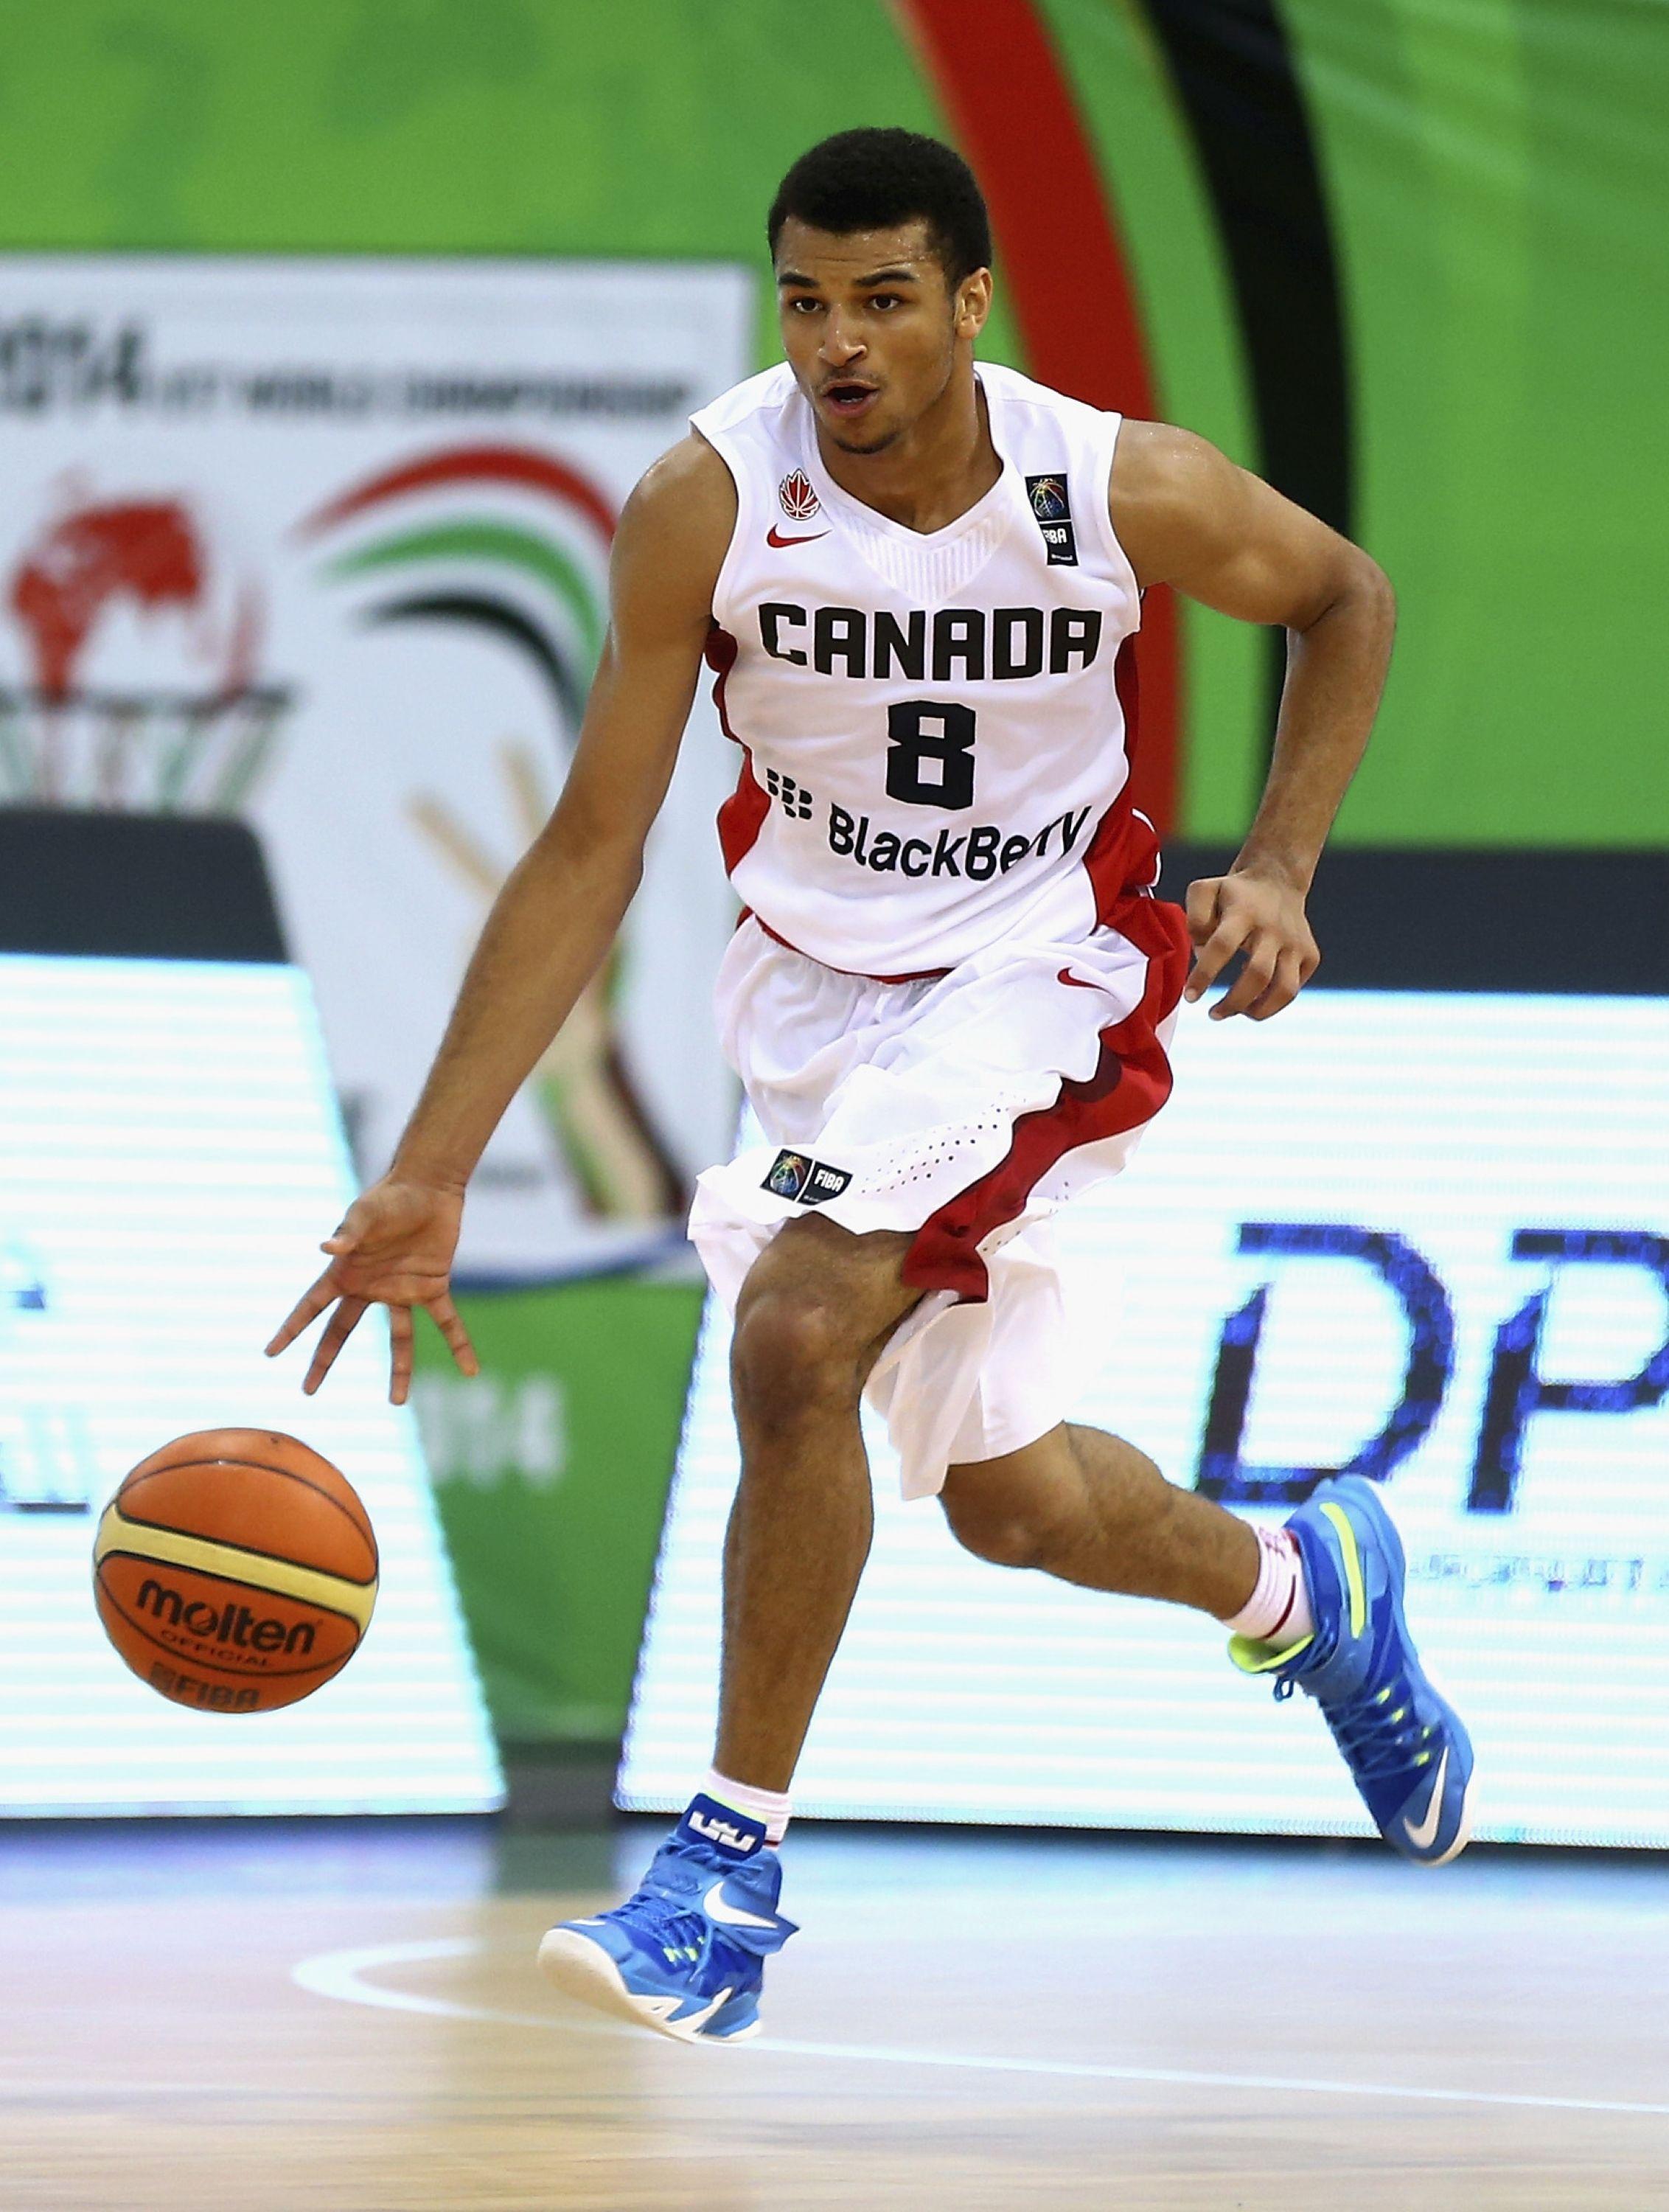 Canadian hoopsters, led by Jamal Murray, shine in high school all